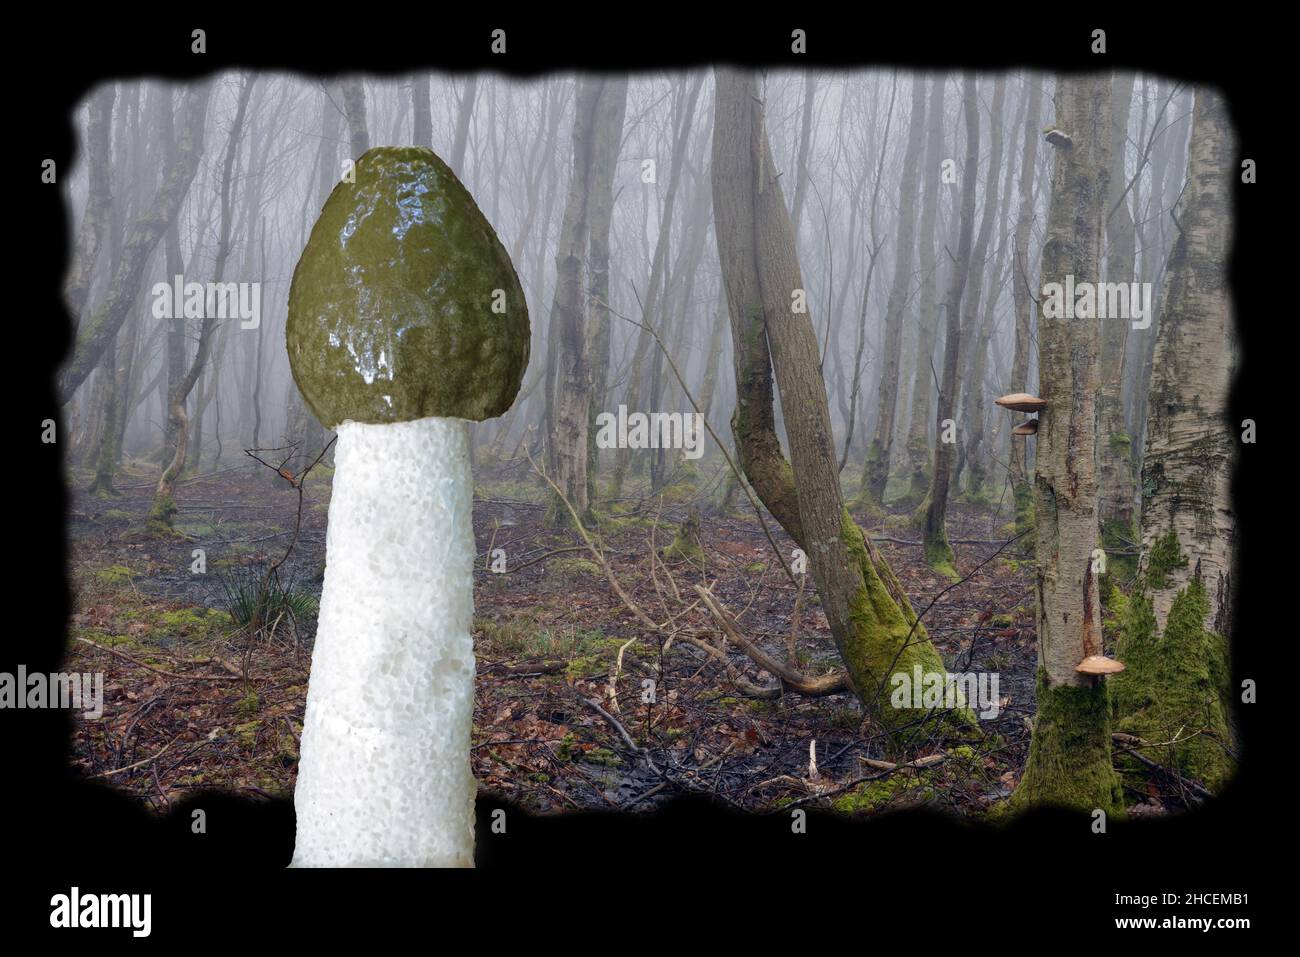 Phallus impudicus (common stinkhorn) is shown here with woodland habitat (background) in North Wales where it is likely to be found Stock Photo